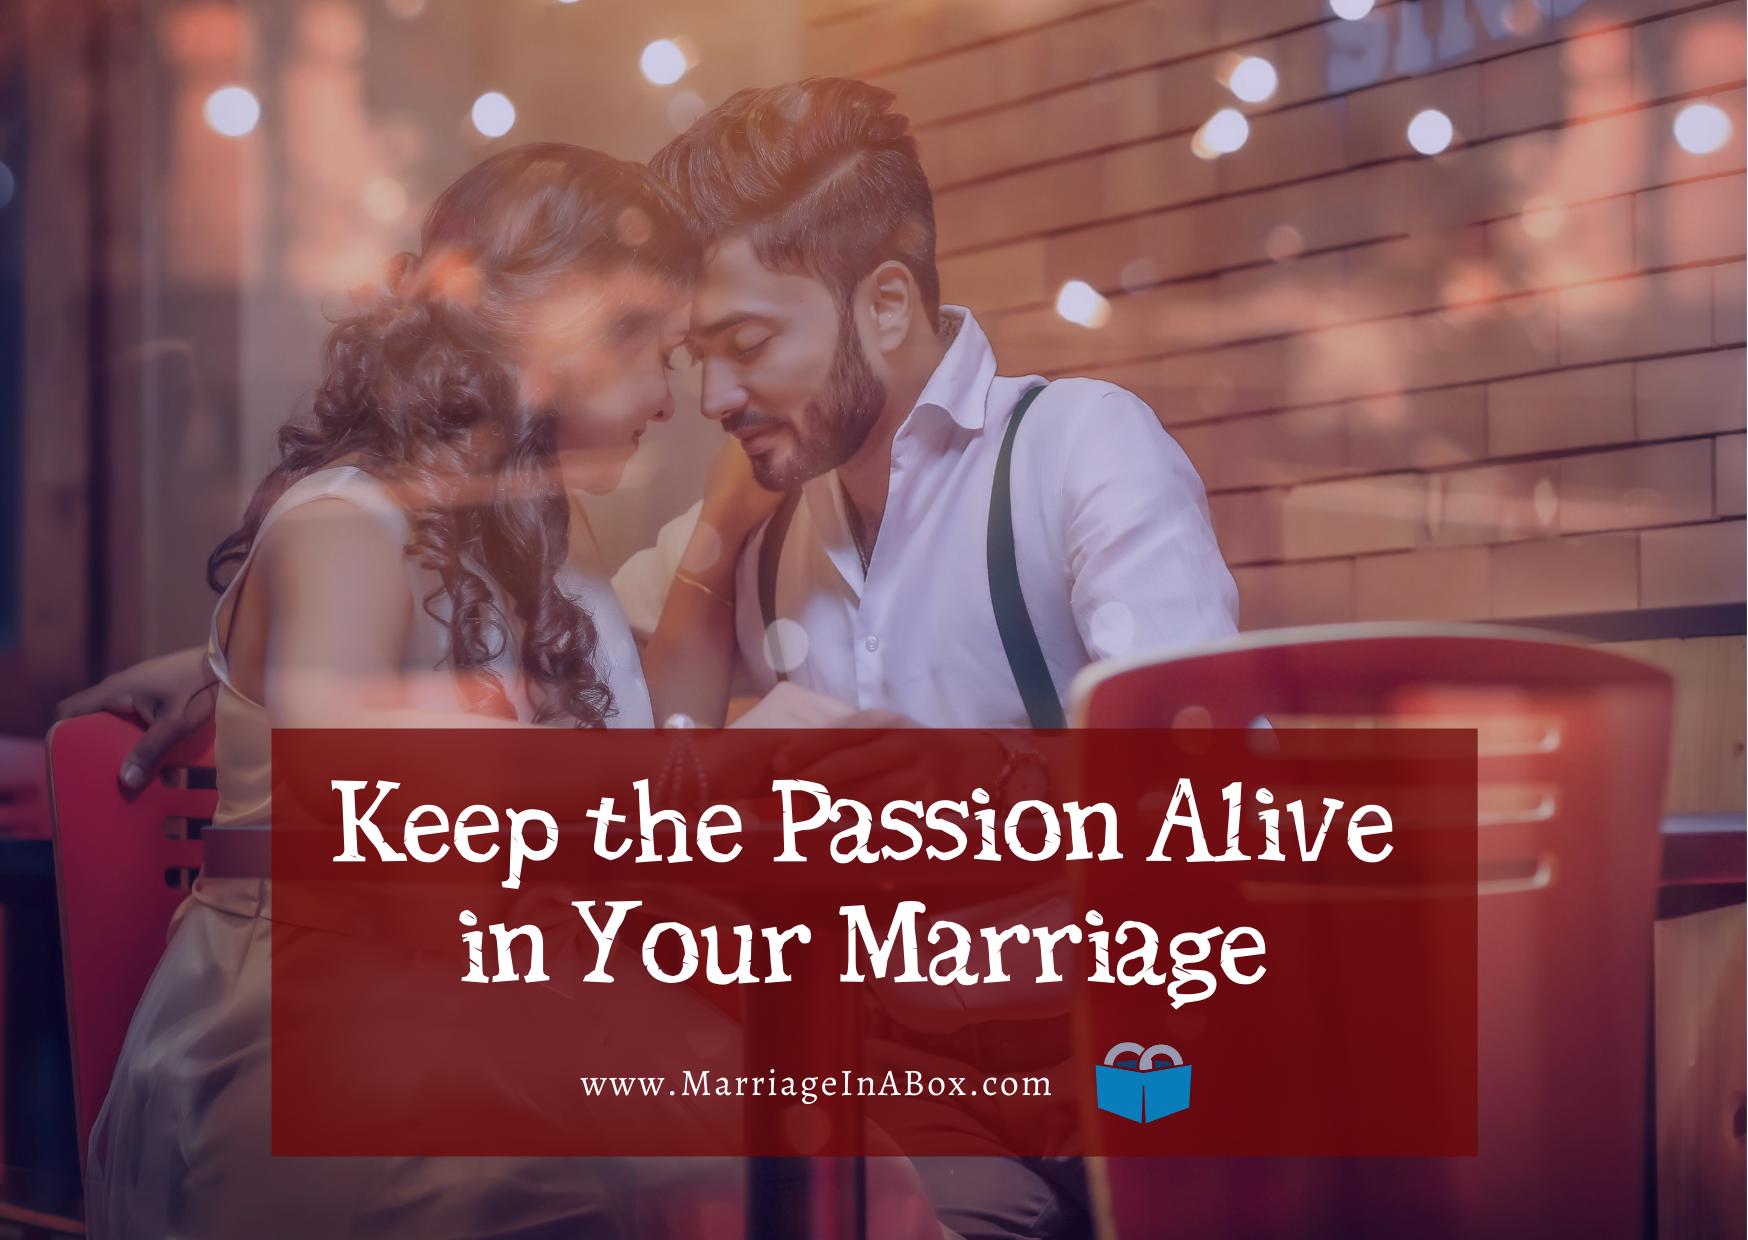 Keep the Passion Alive in Your Marriage